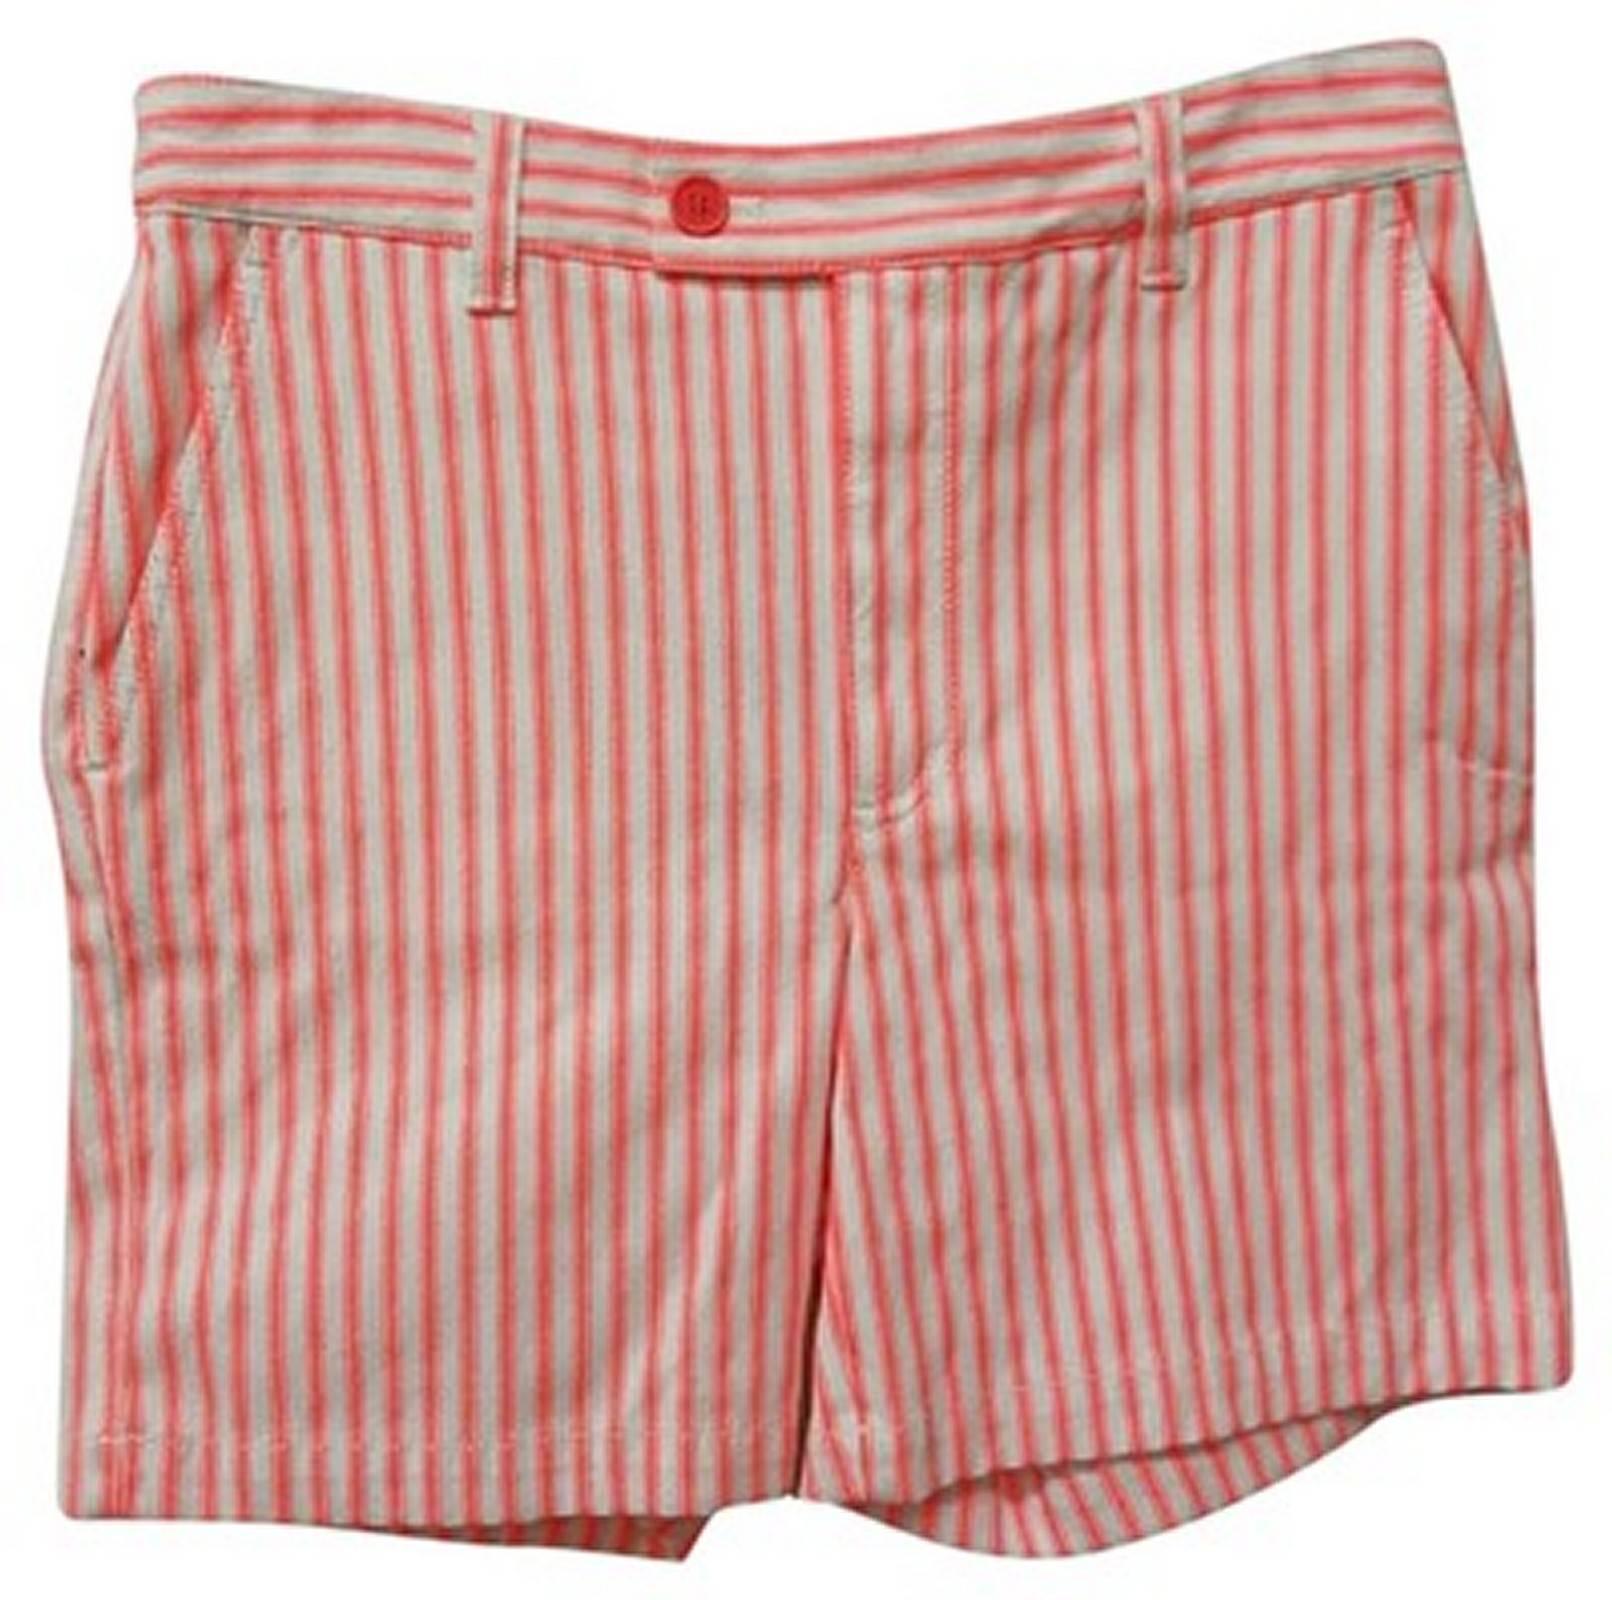 Marc by Marc Jacobs Striped Shorts - Size: 6 (S, 28) For Sale